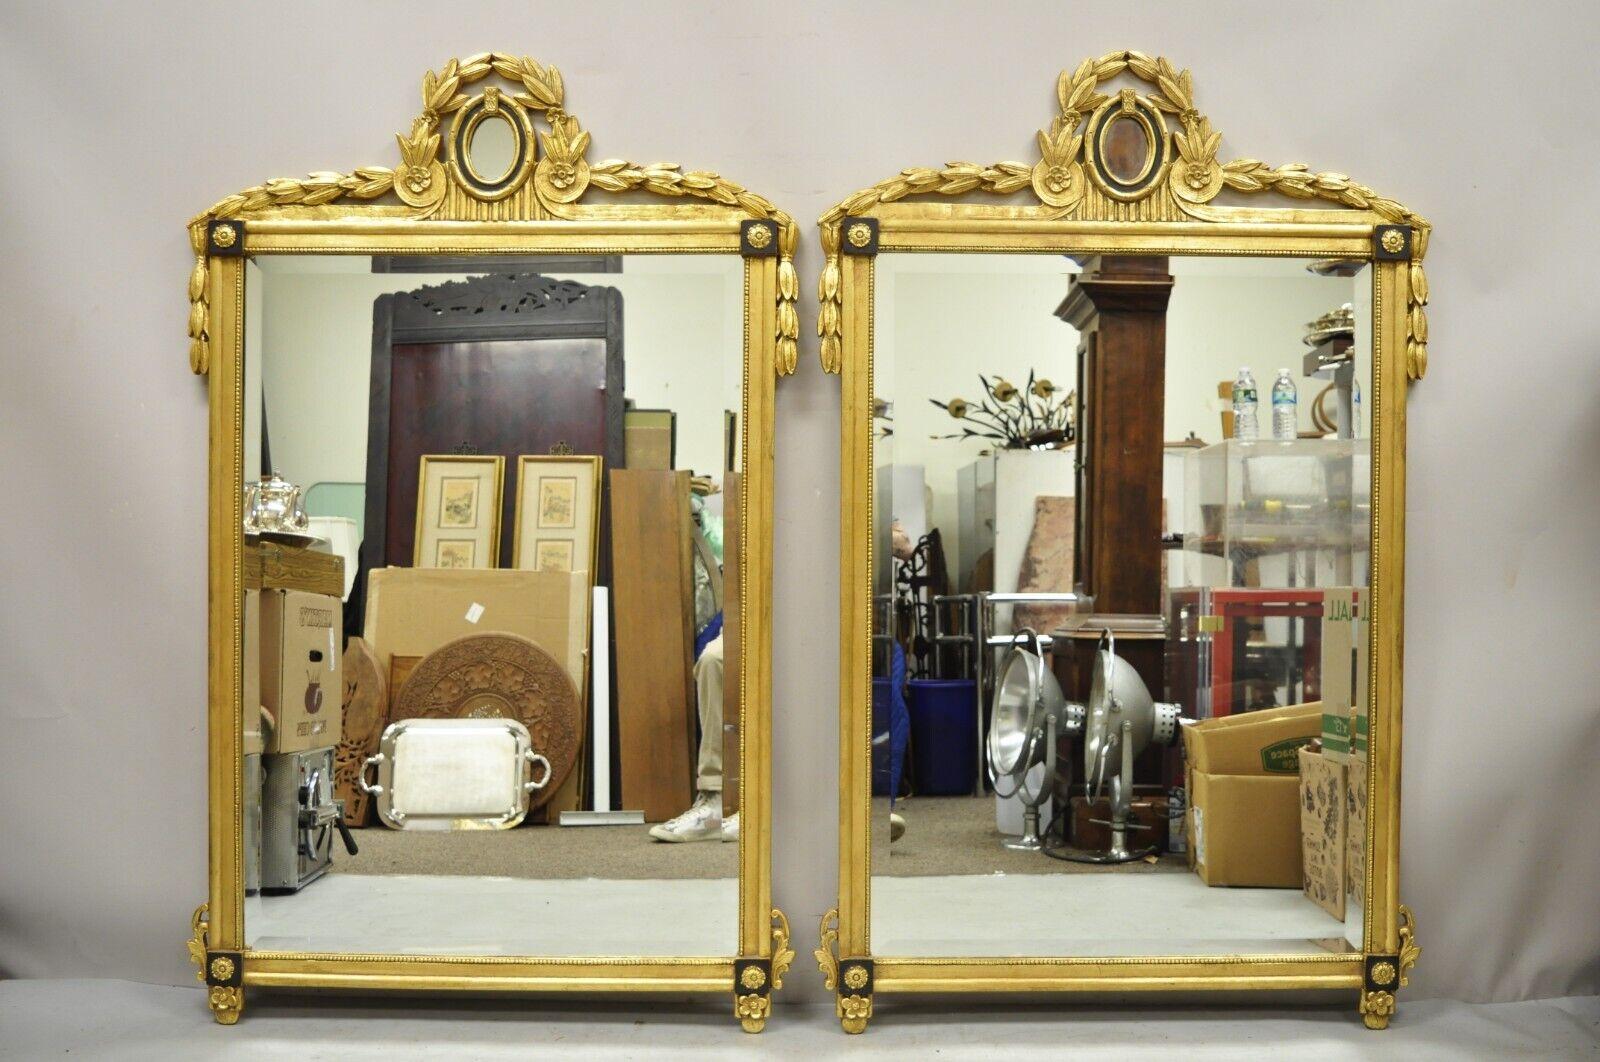 Friedman Brothers French Neoclassical Carved Wood Large Wall Mirrors - a Pair For Sale 4